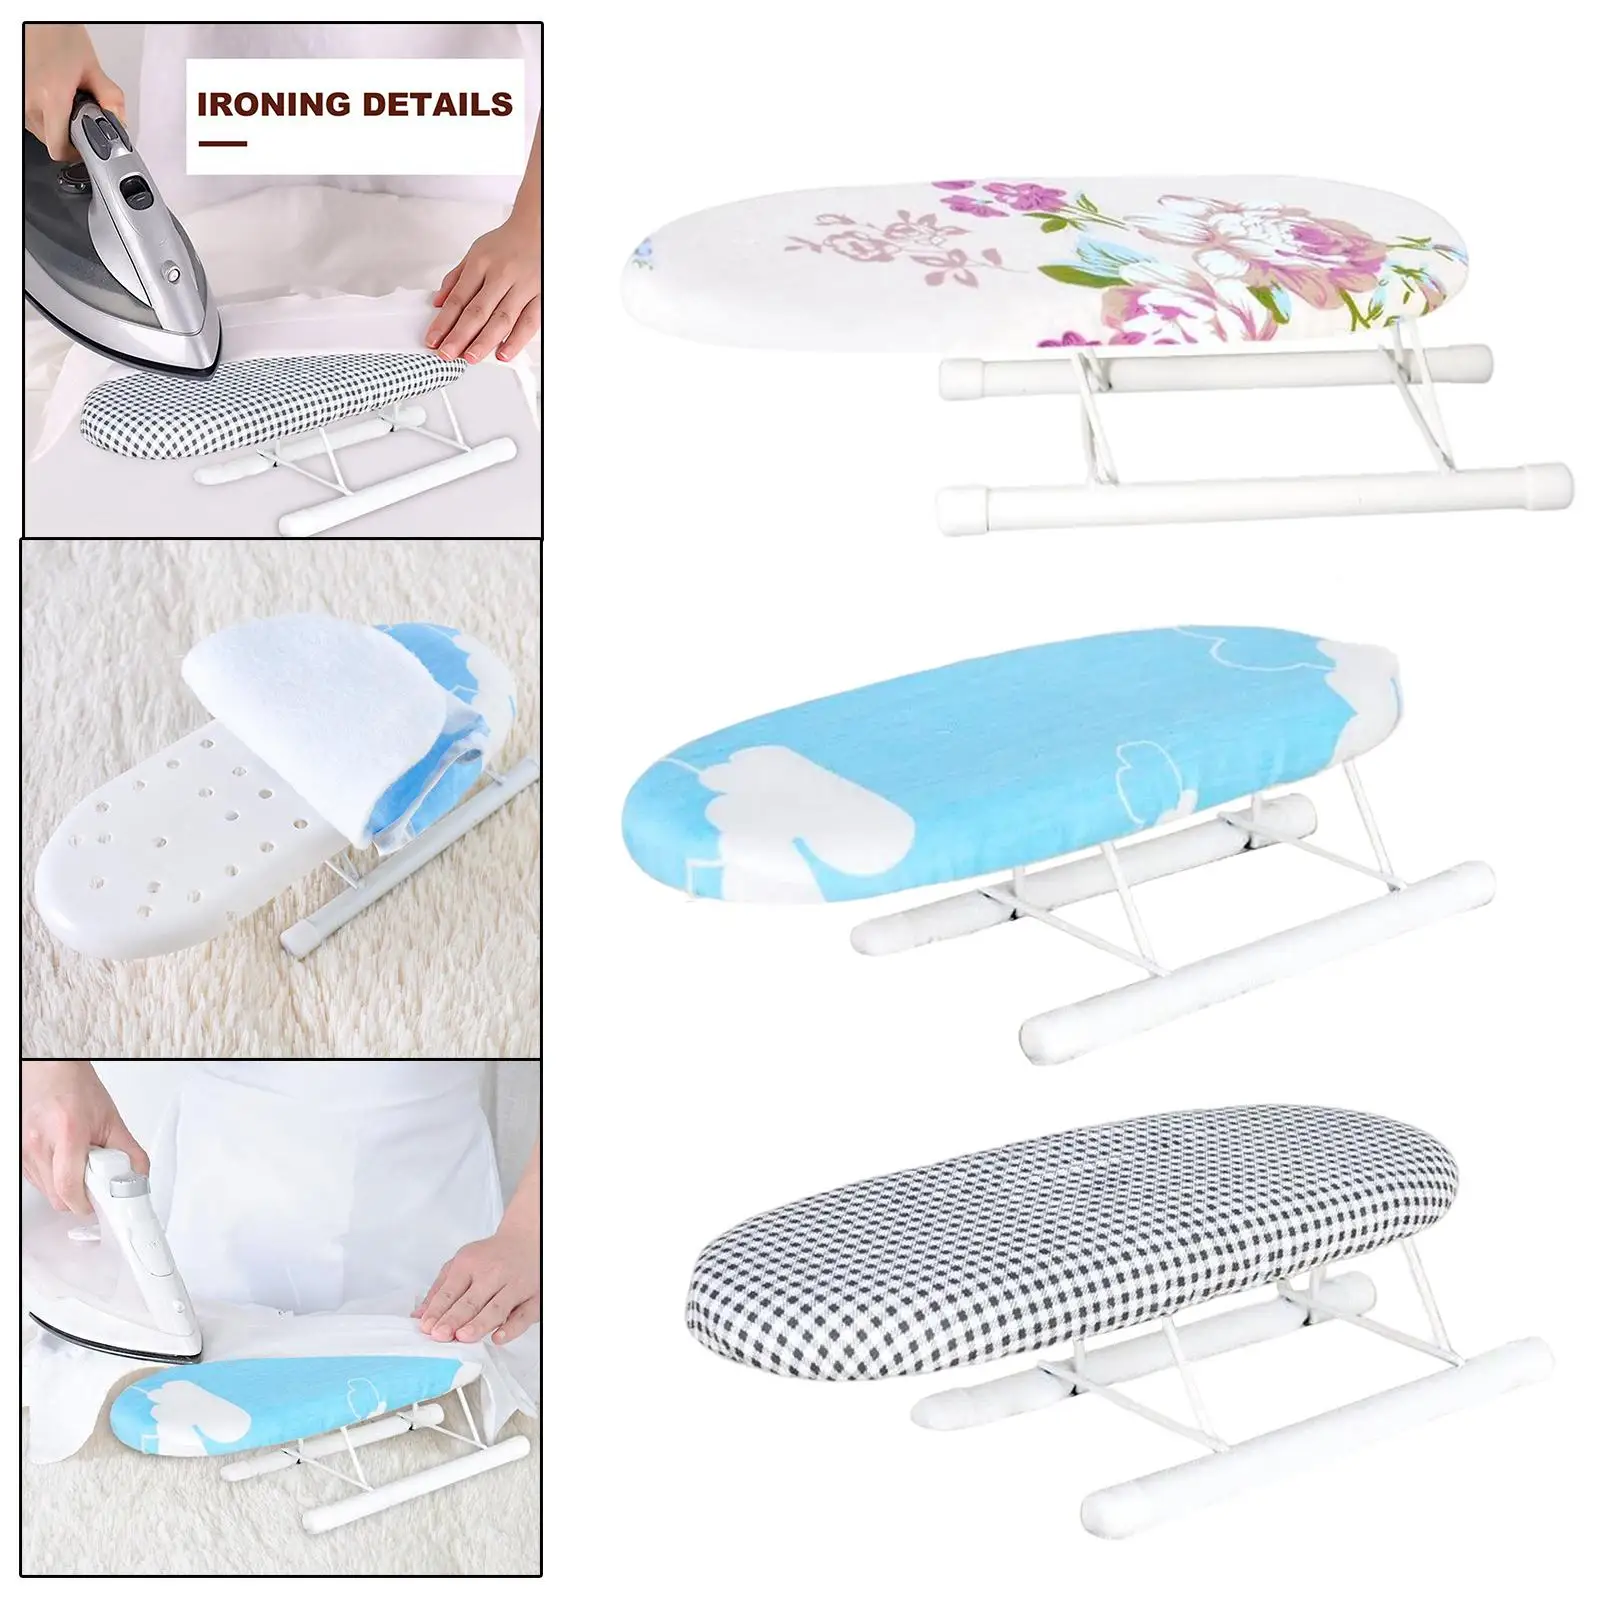 Table Top Ironing Board Foldable Sleeve Cuffs Collars Washable Removable for Sewing Room Dorm Household Home Apartment